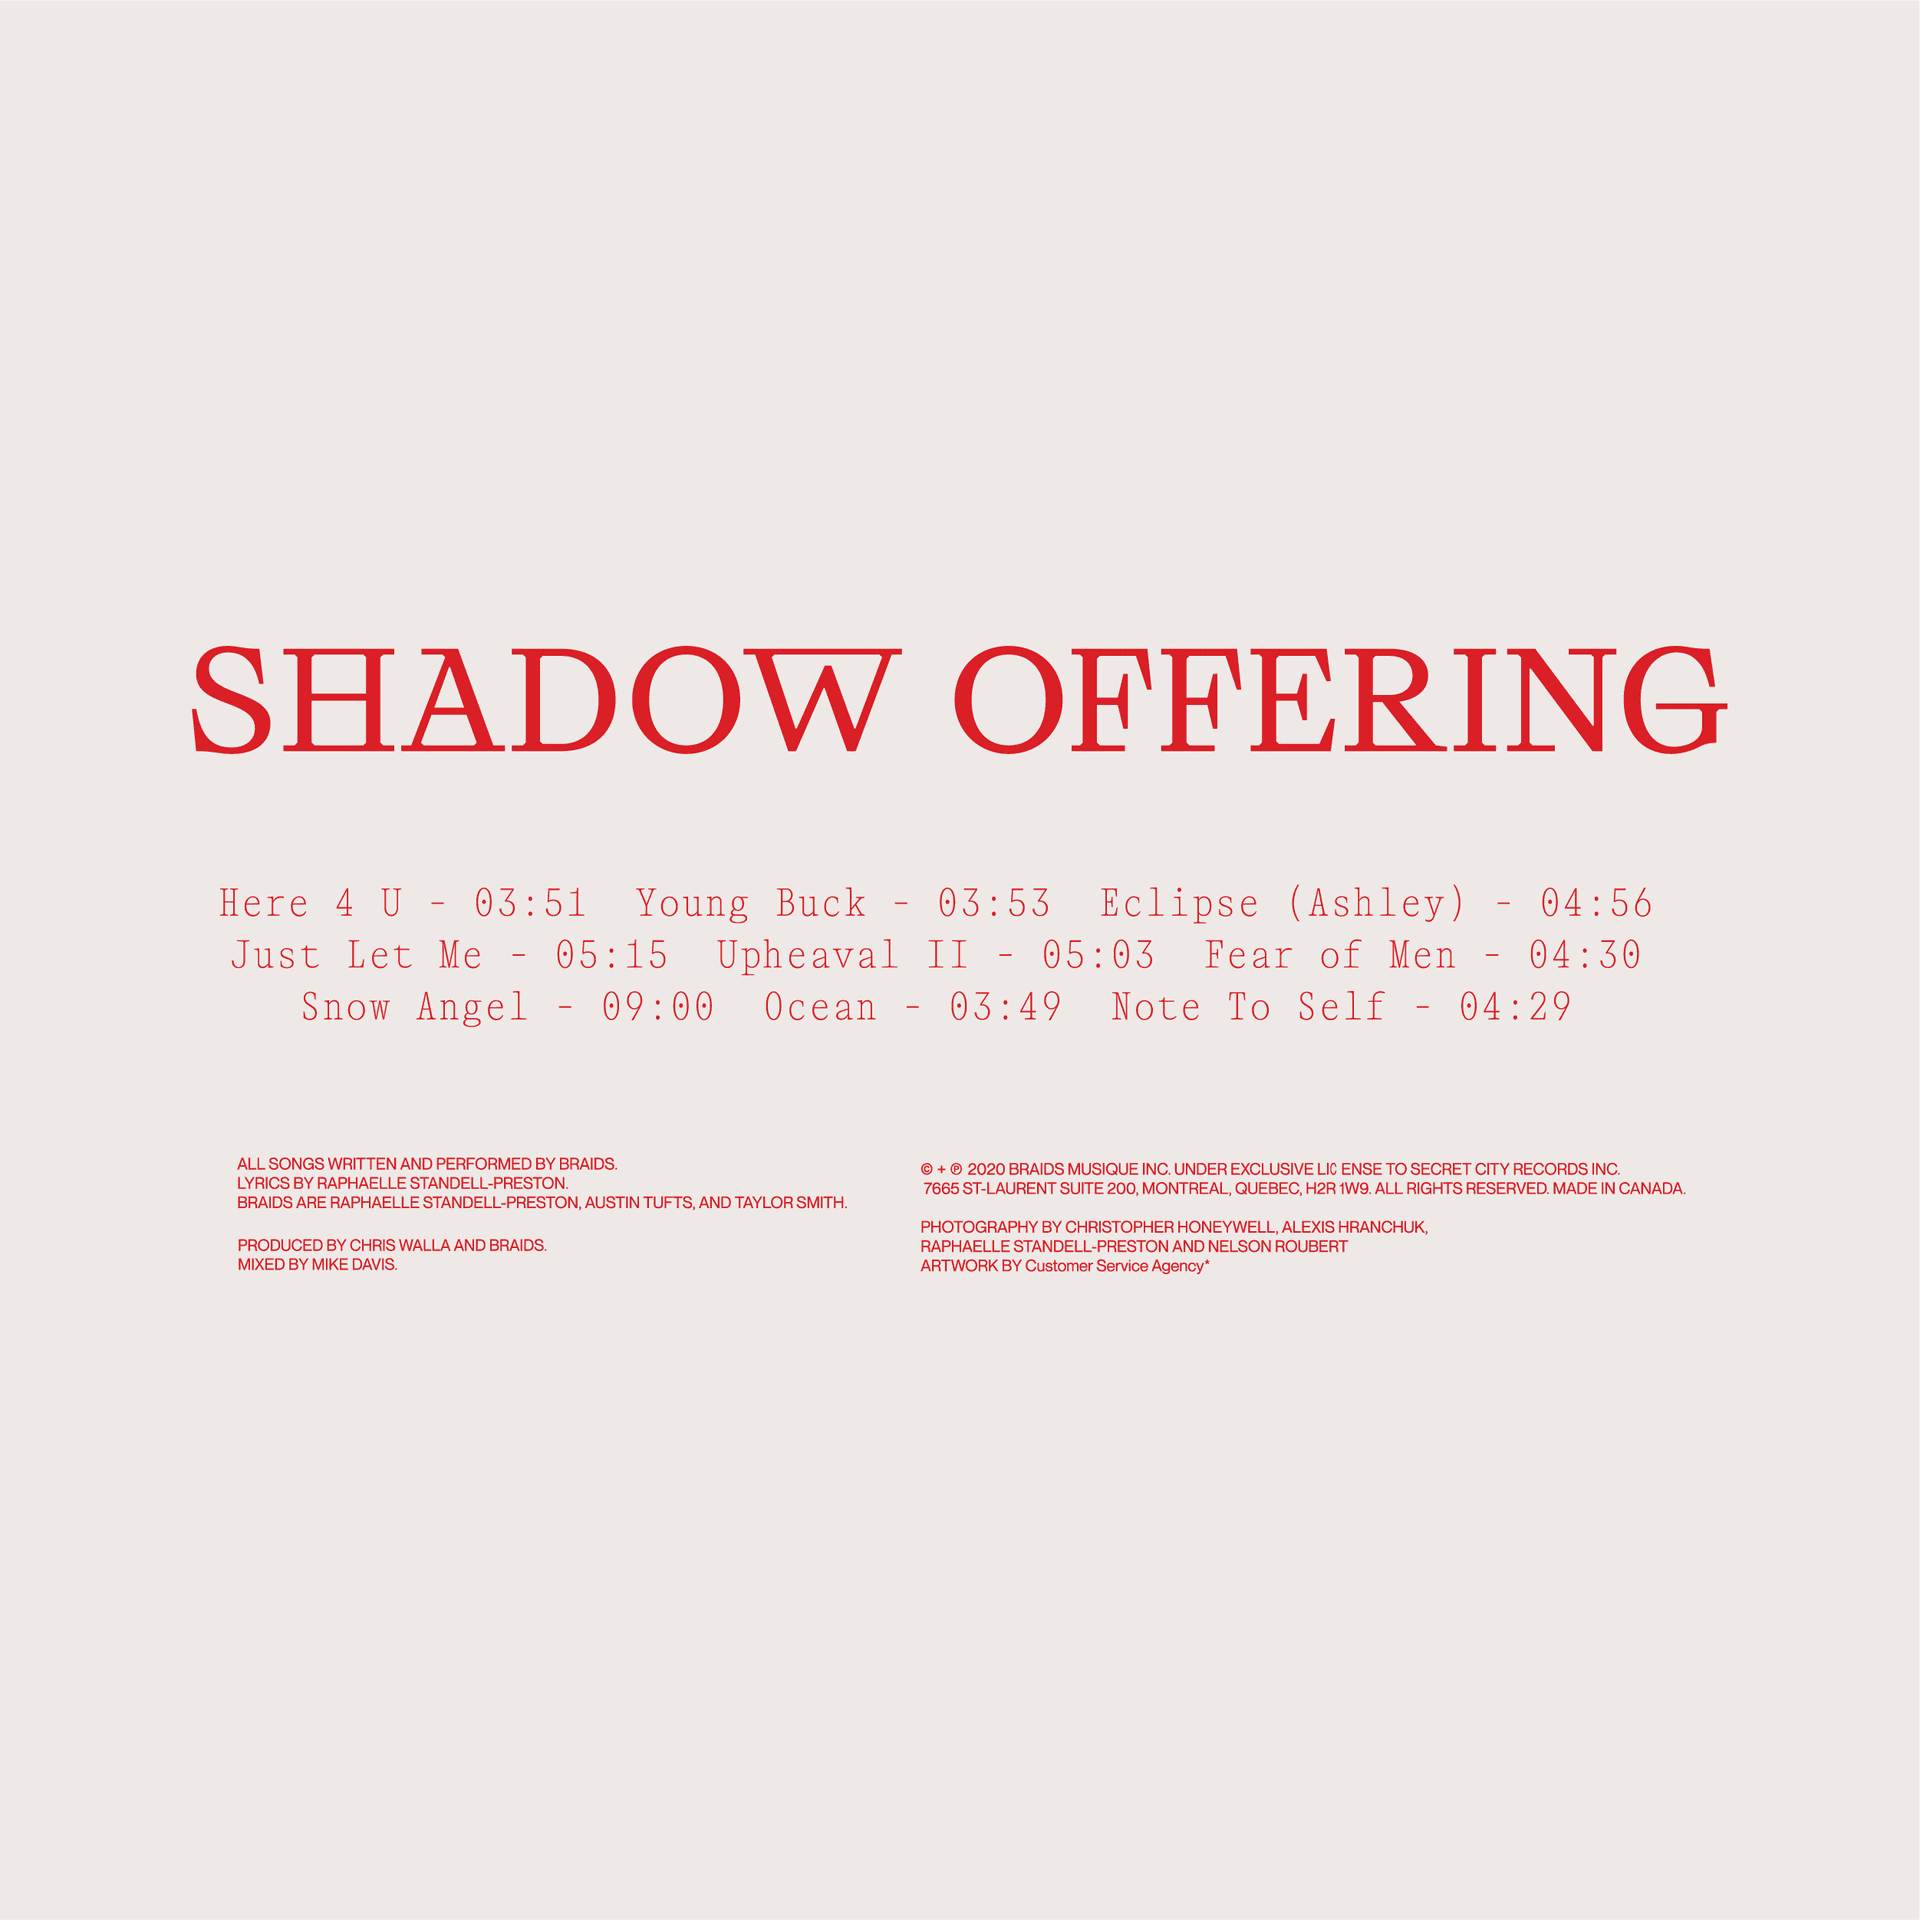 ‘SHADOW OFFERING’ TOTE BAG - image 3 of 3